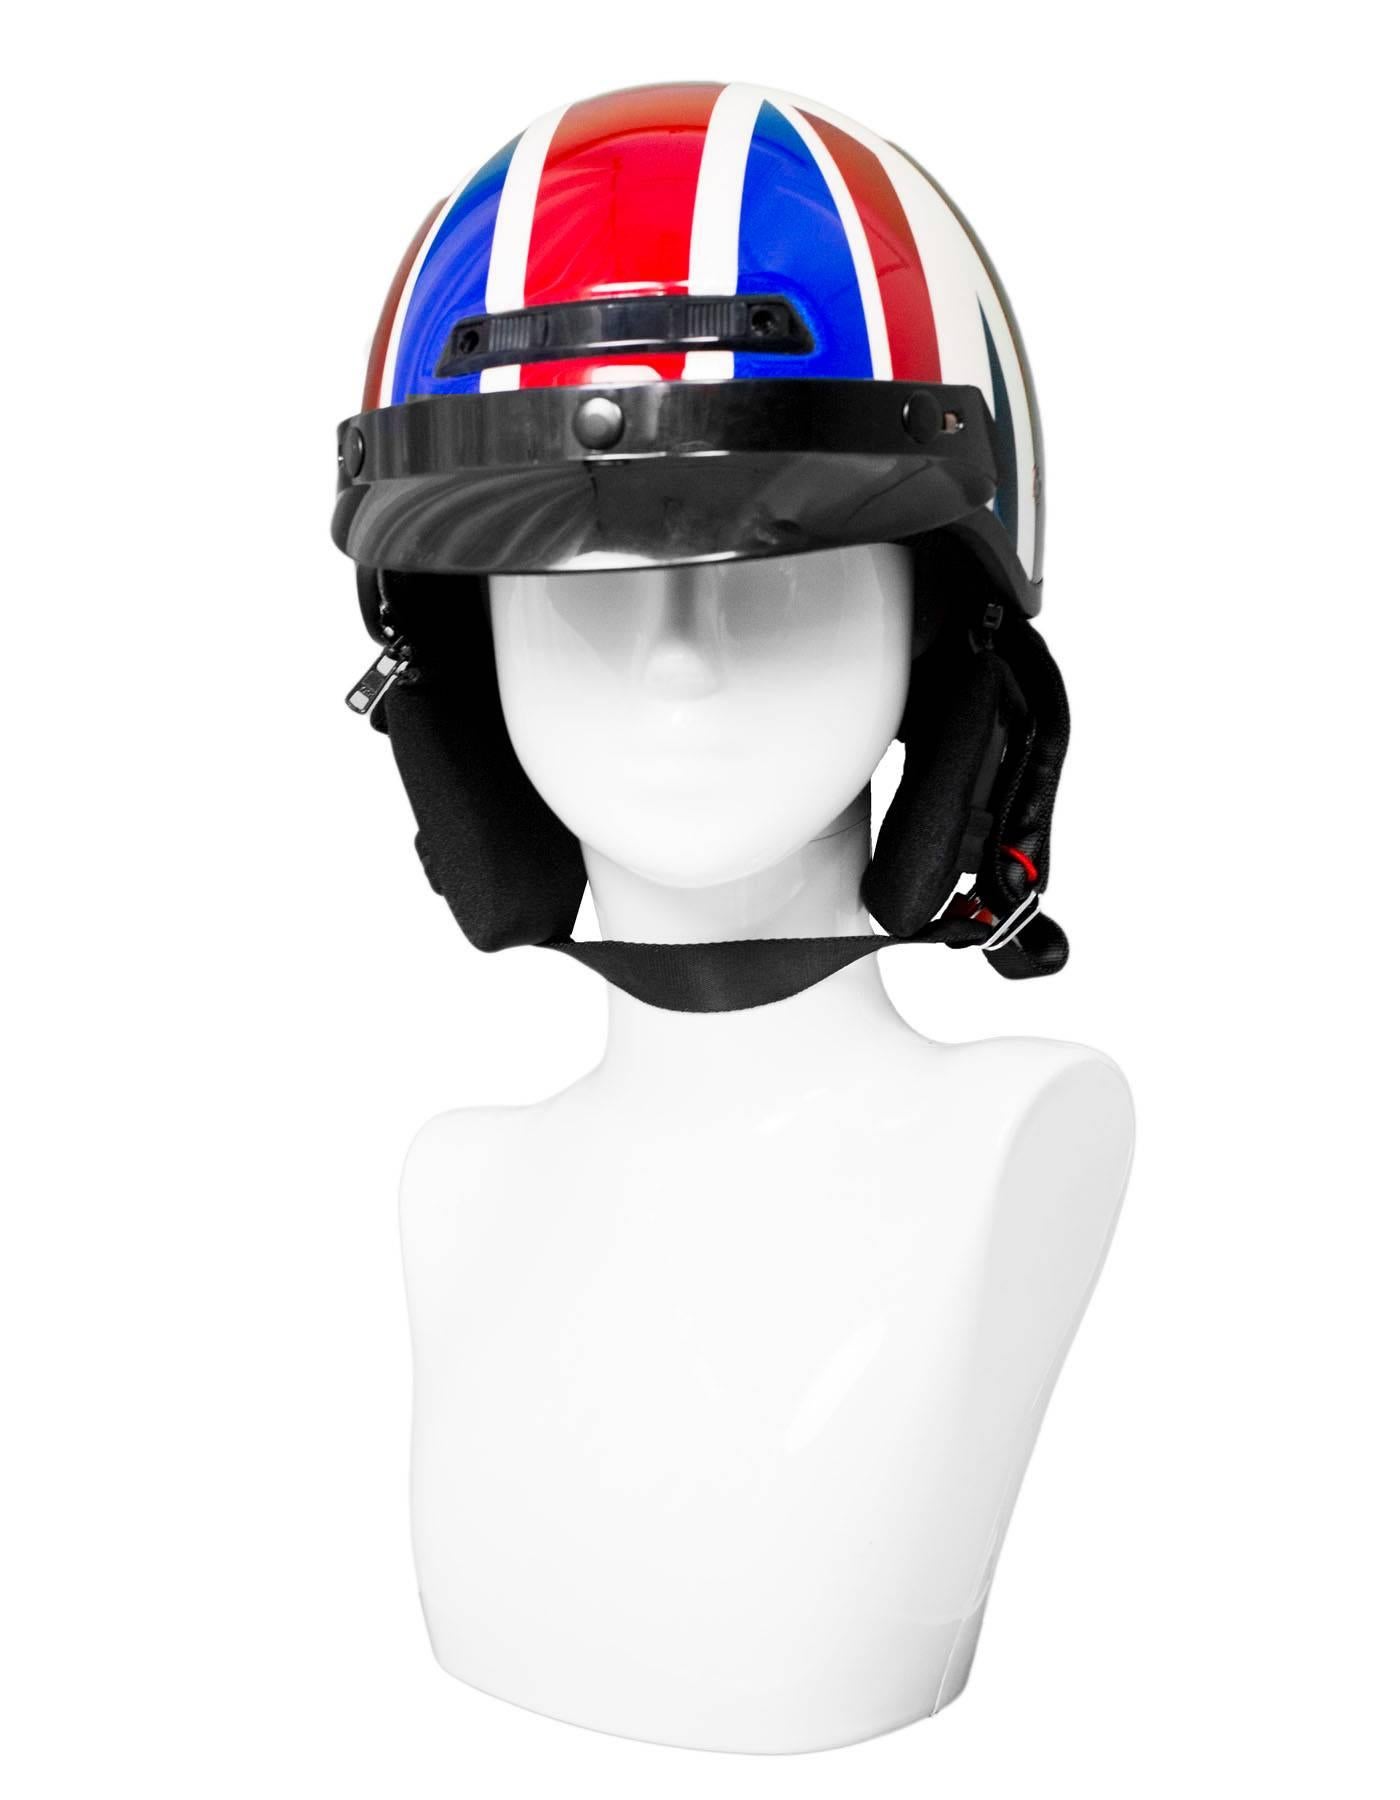 Marc Jacobs Red, White & Blue British Flag Riding Helmet Sz M
Features glitter sparkle throughout

Color: Red, white, blue
Materials: Plastic, foam
Overall Condition: Excellent pre-owned condition, light wear at interior lining

Marked Size: